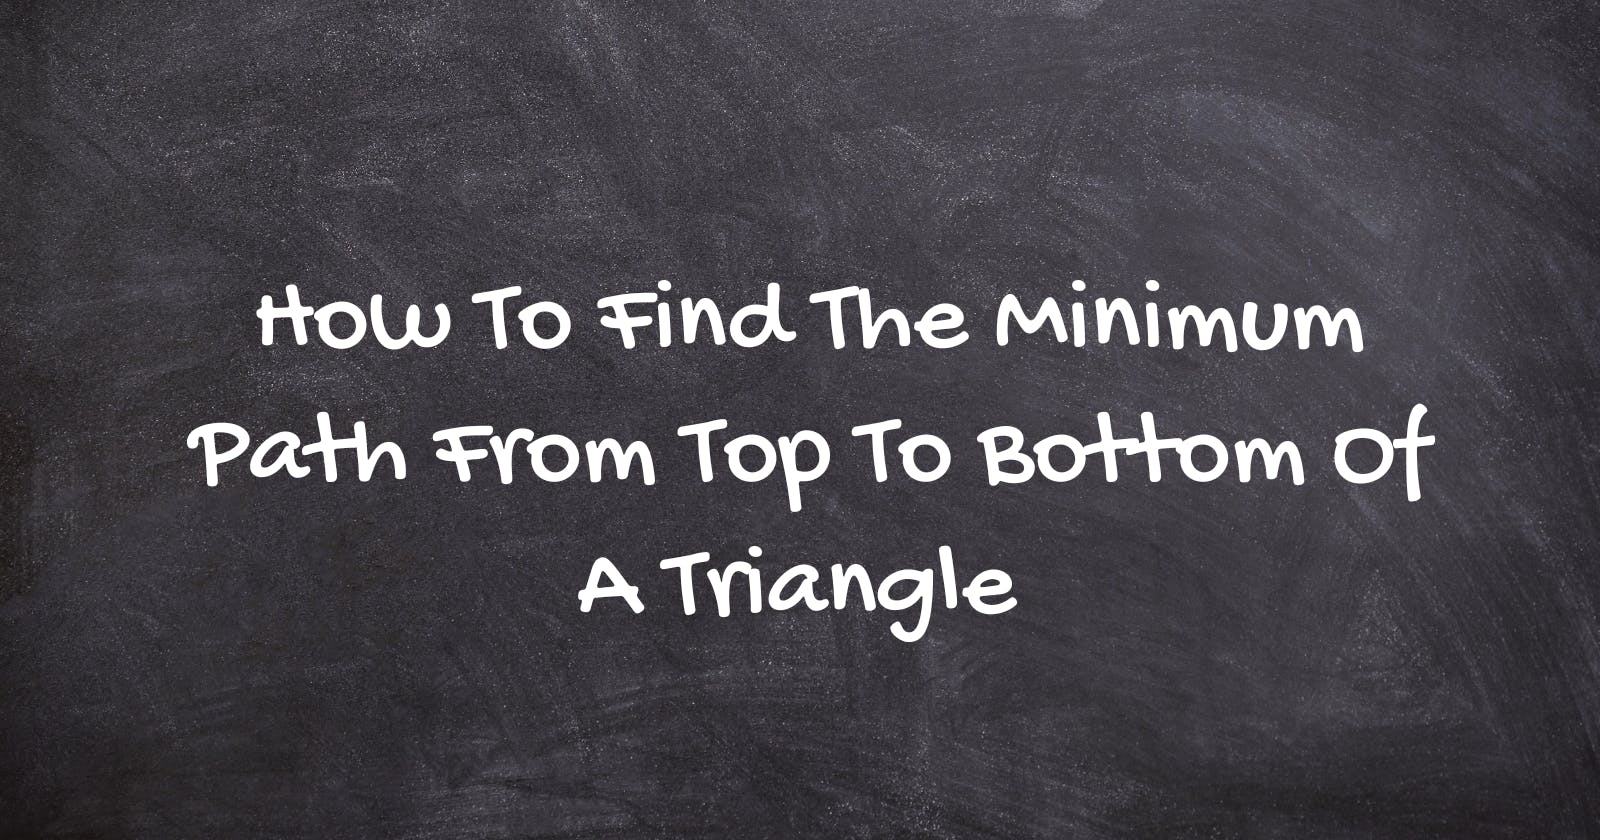 How To Find The Minimum Path From Top To Bottom Of A Triangle